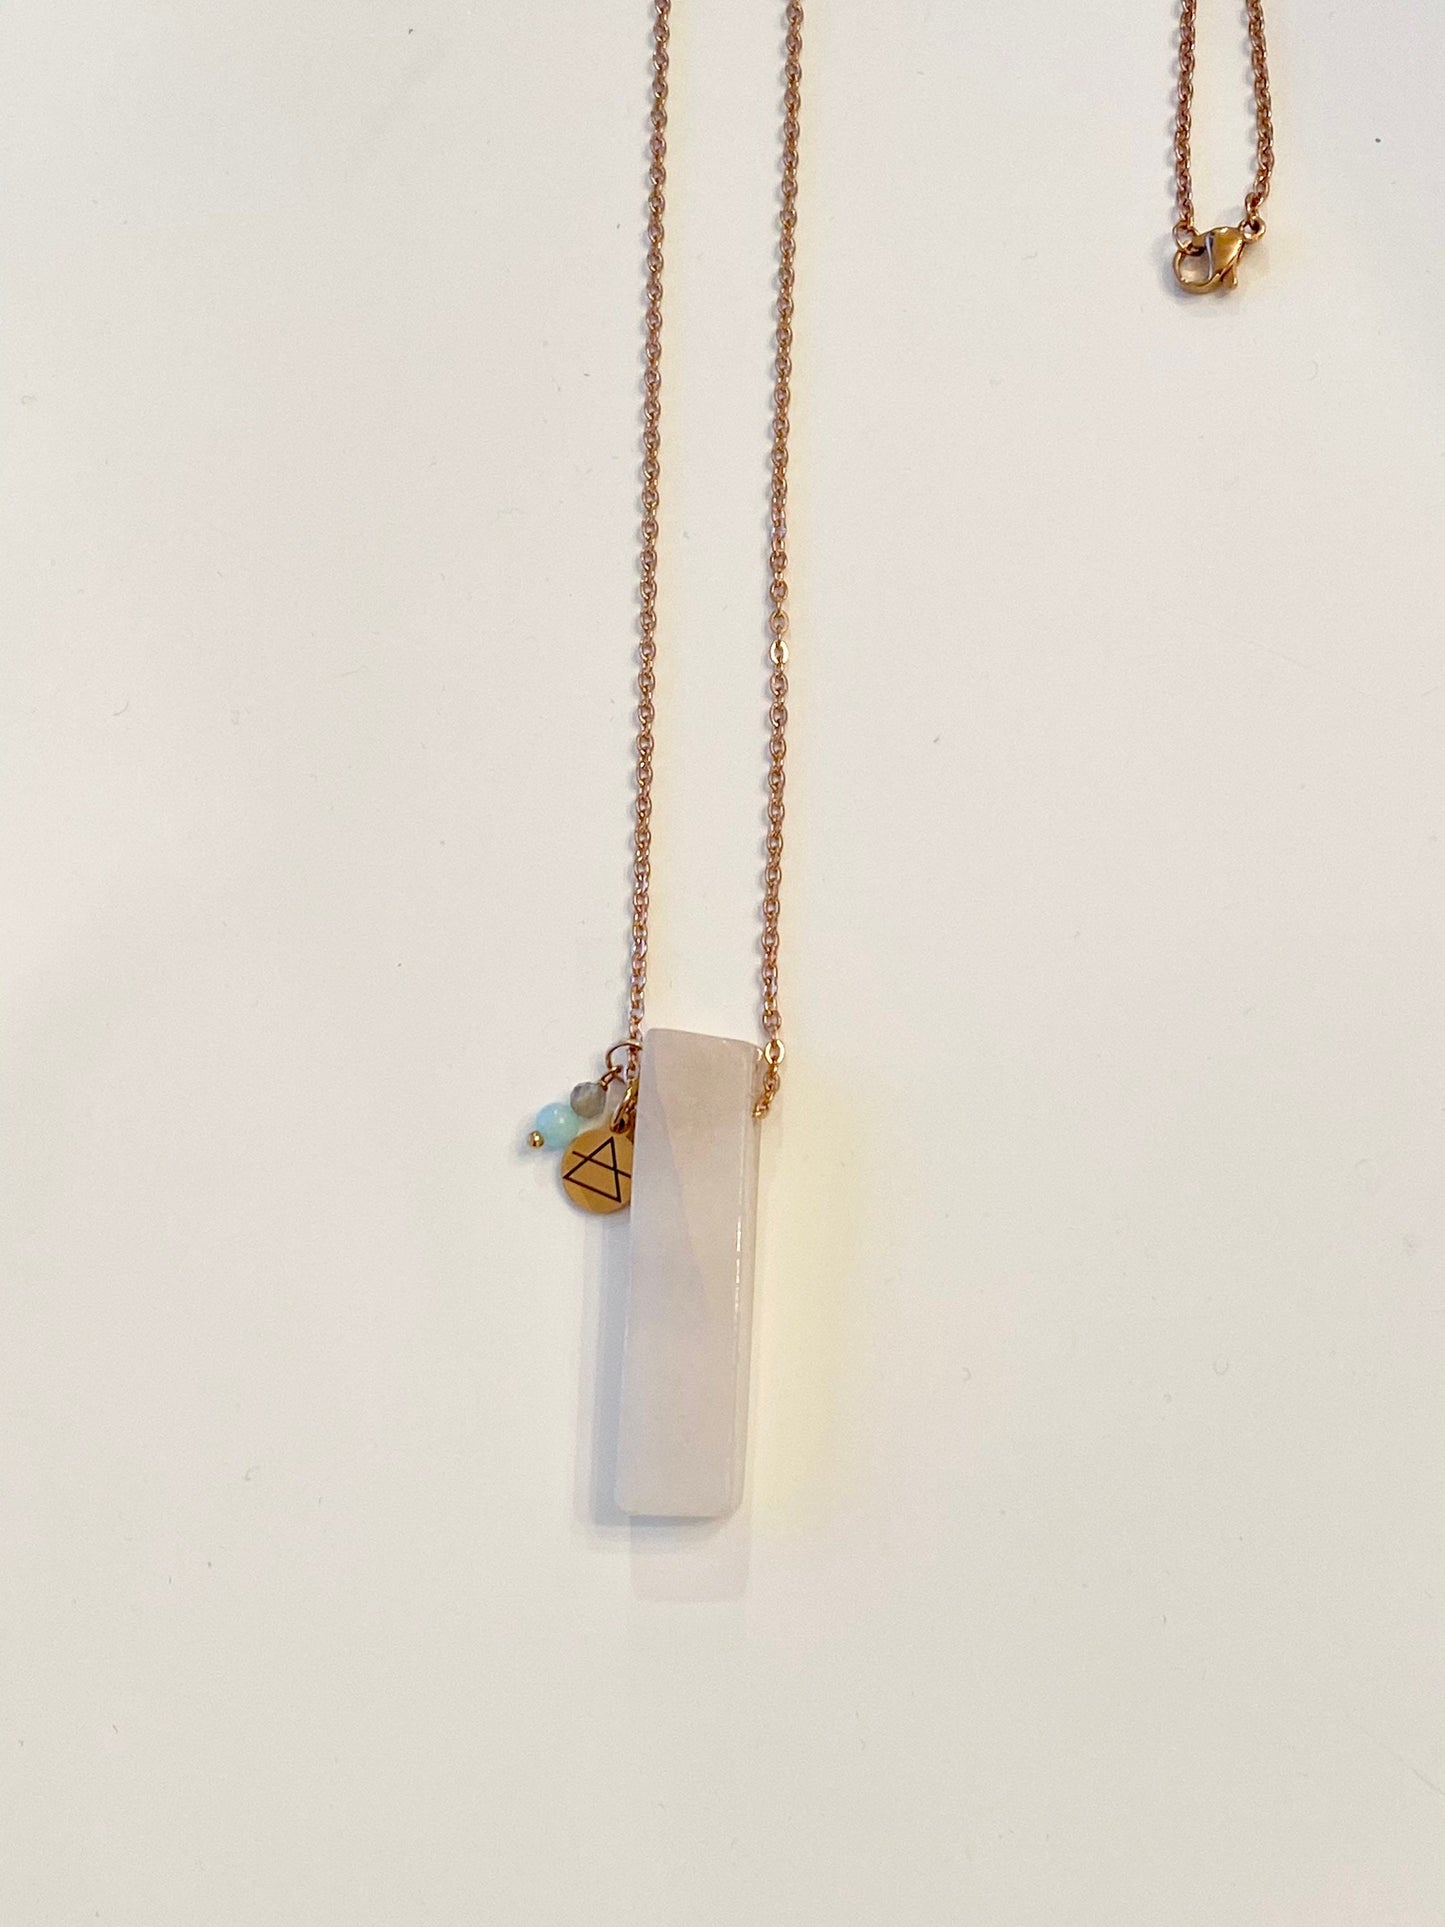 Long rose gold necklace, Natural stone crystal necklace, pink aventurine, raw stone, rectangular chip, semiprecious stone, healing energy